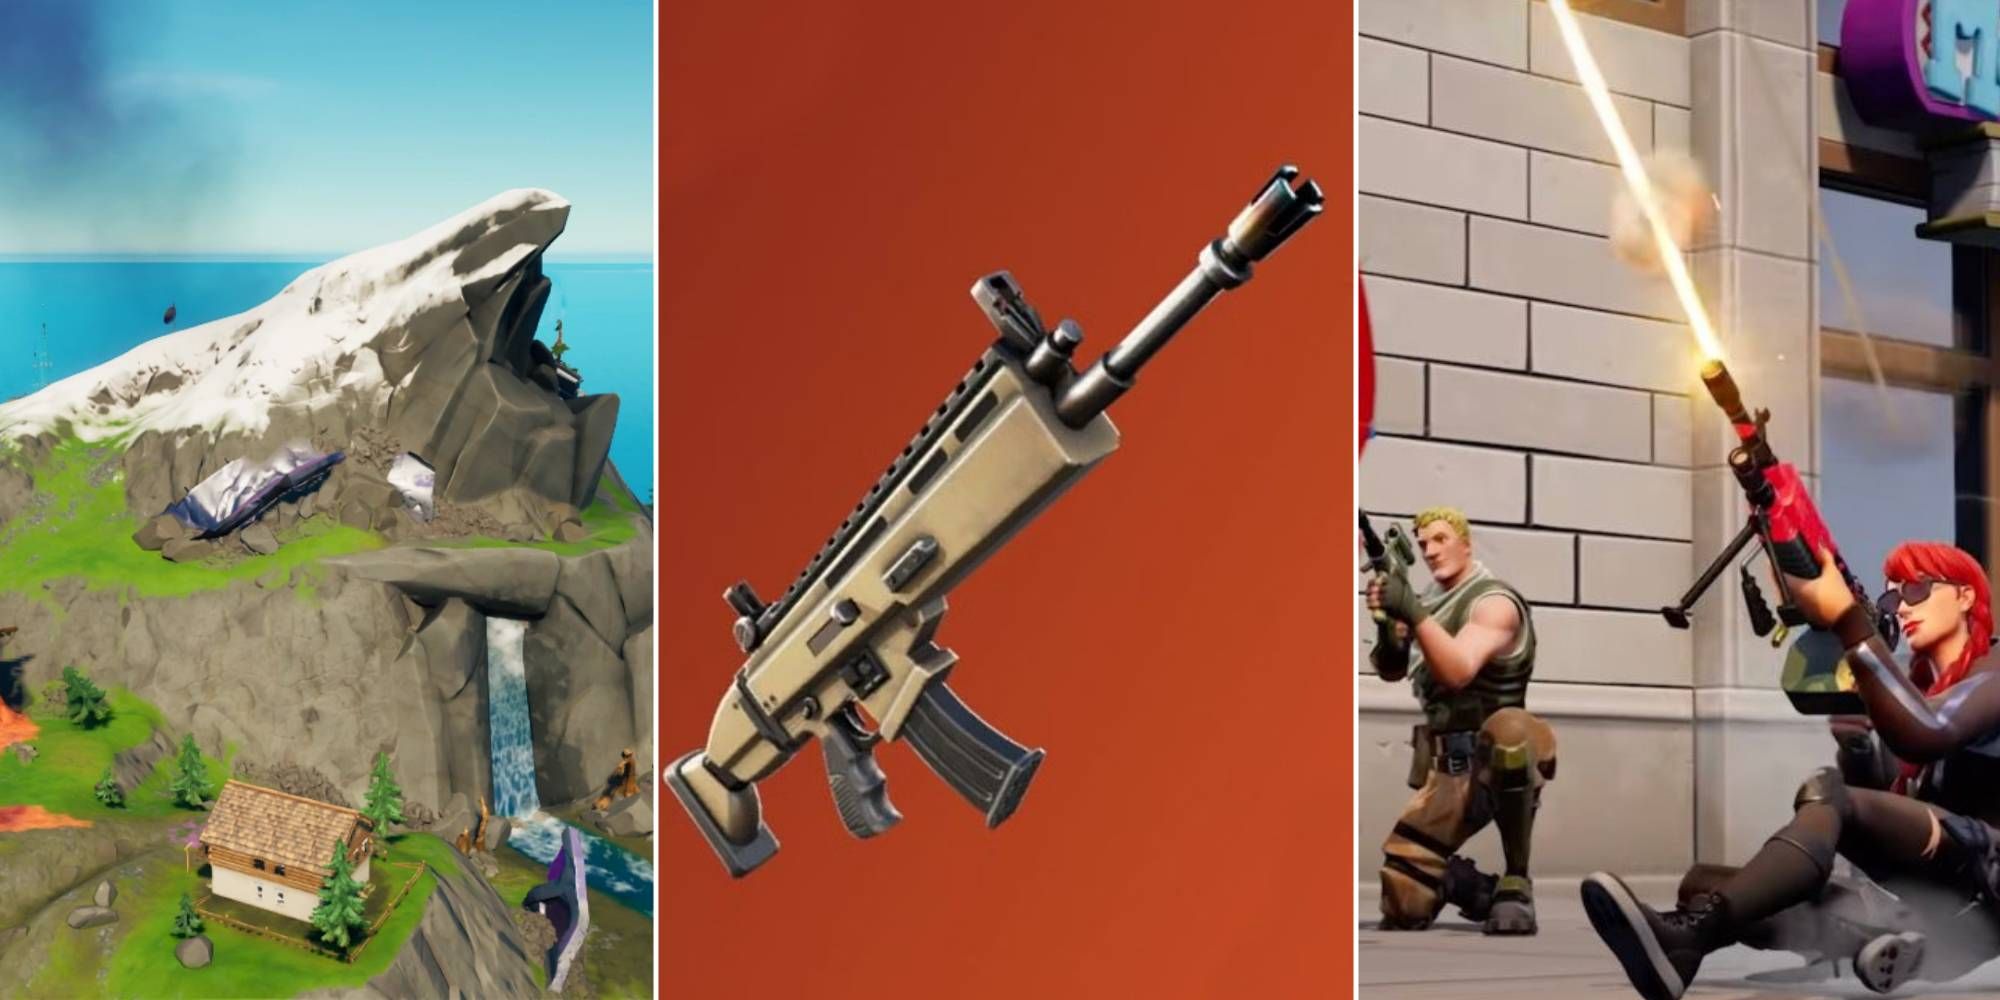 A tall mountain in Fortnite, one of Fortnite's assault rifles, and two players sliding while shooting their weapons in Fortnite Zero Build.